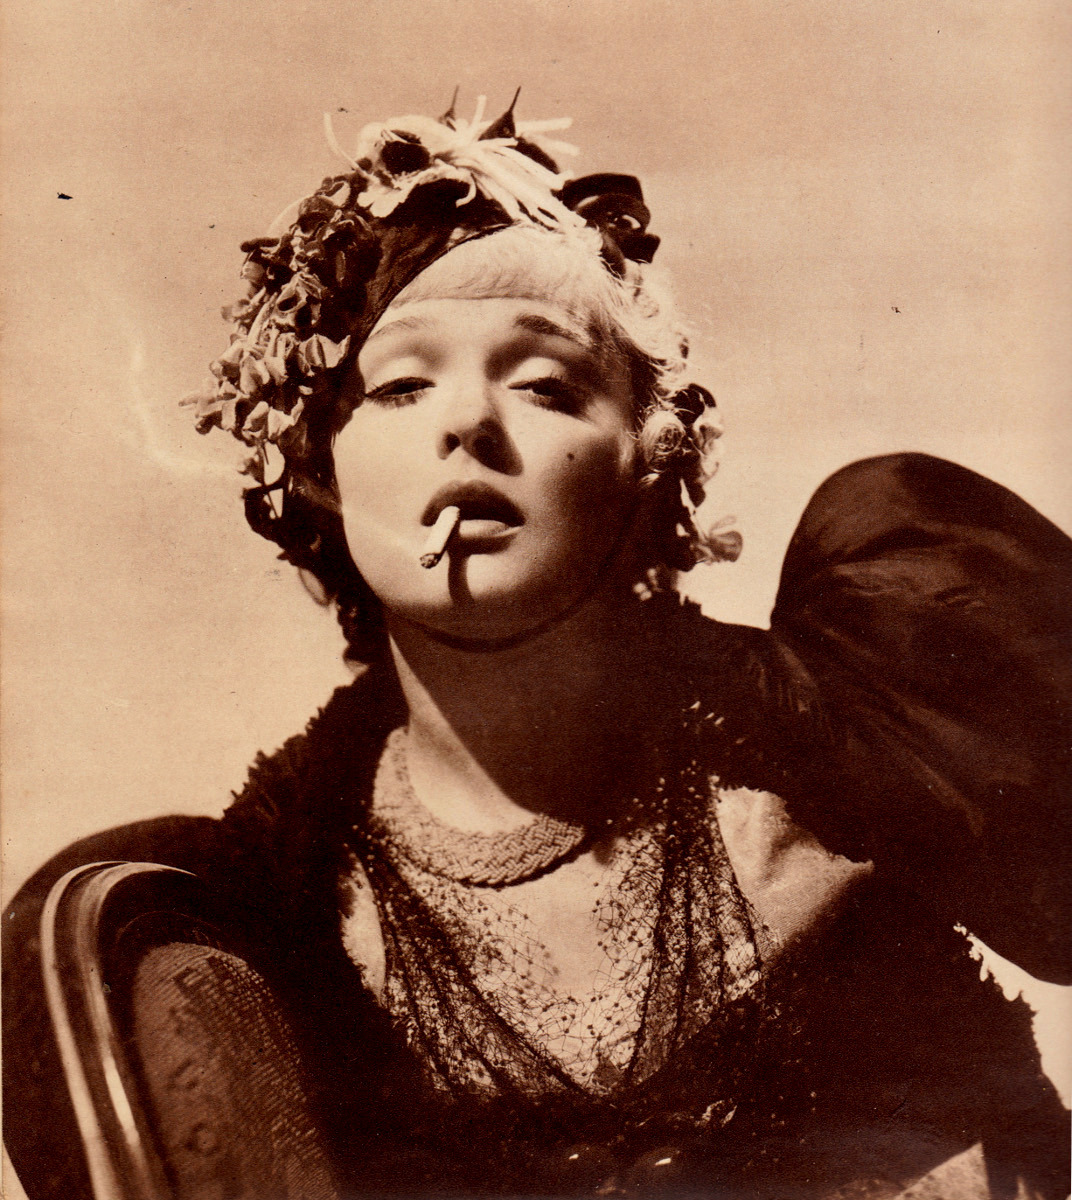 Anna Sten, from the Daily Express Film Book, edited by Ernest Betts (Daily Express